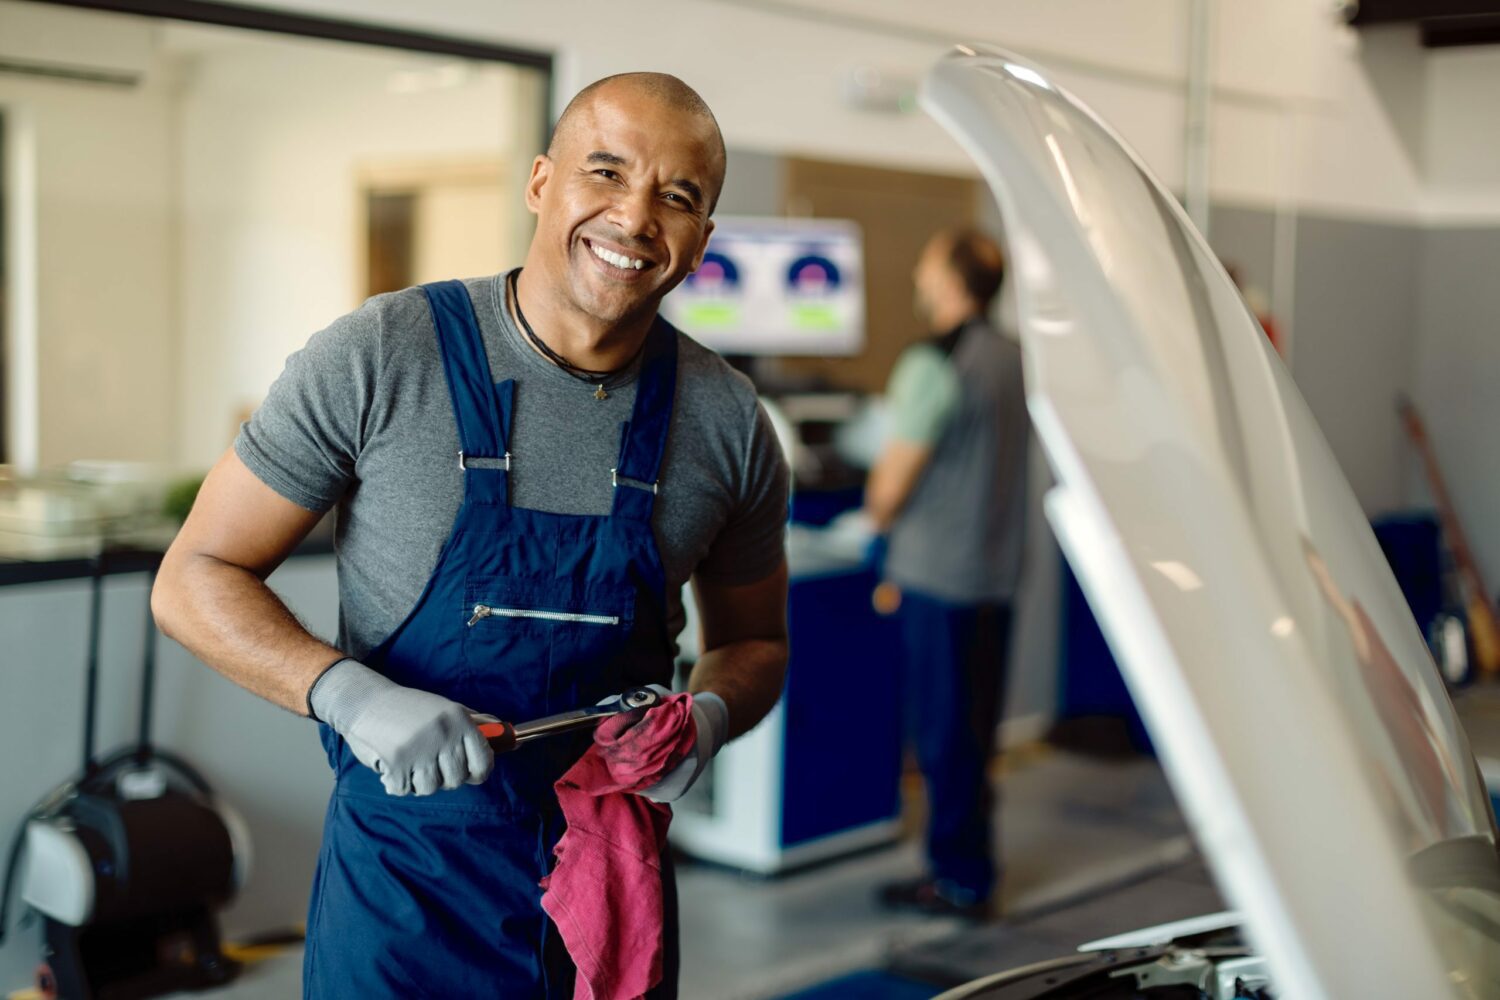 In many markets, qualified technicians have their choice of employer. Creating a strong and inviting brand separates you from the competition.